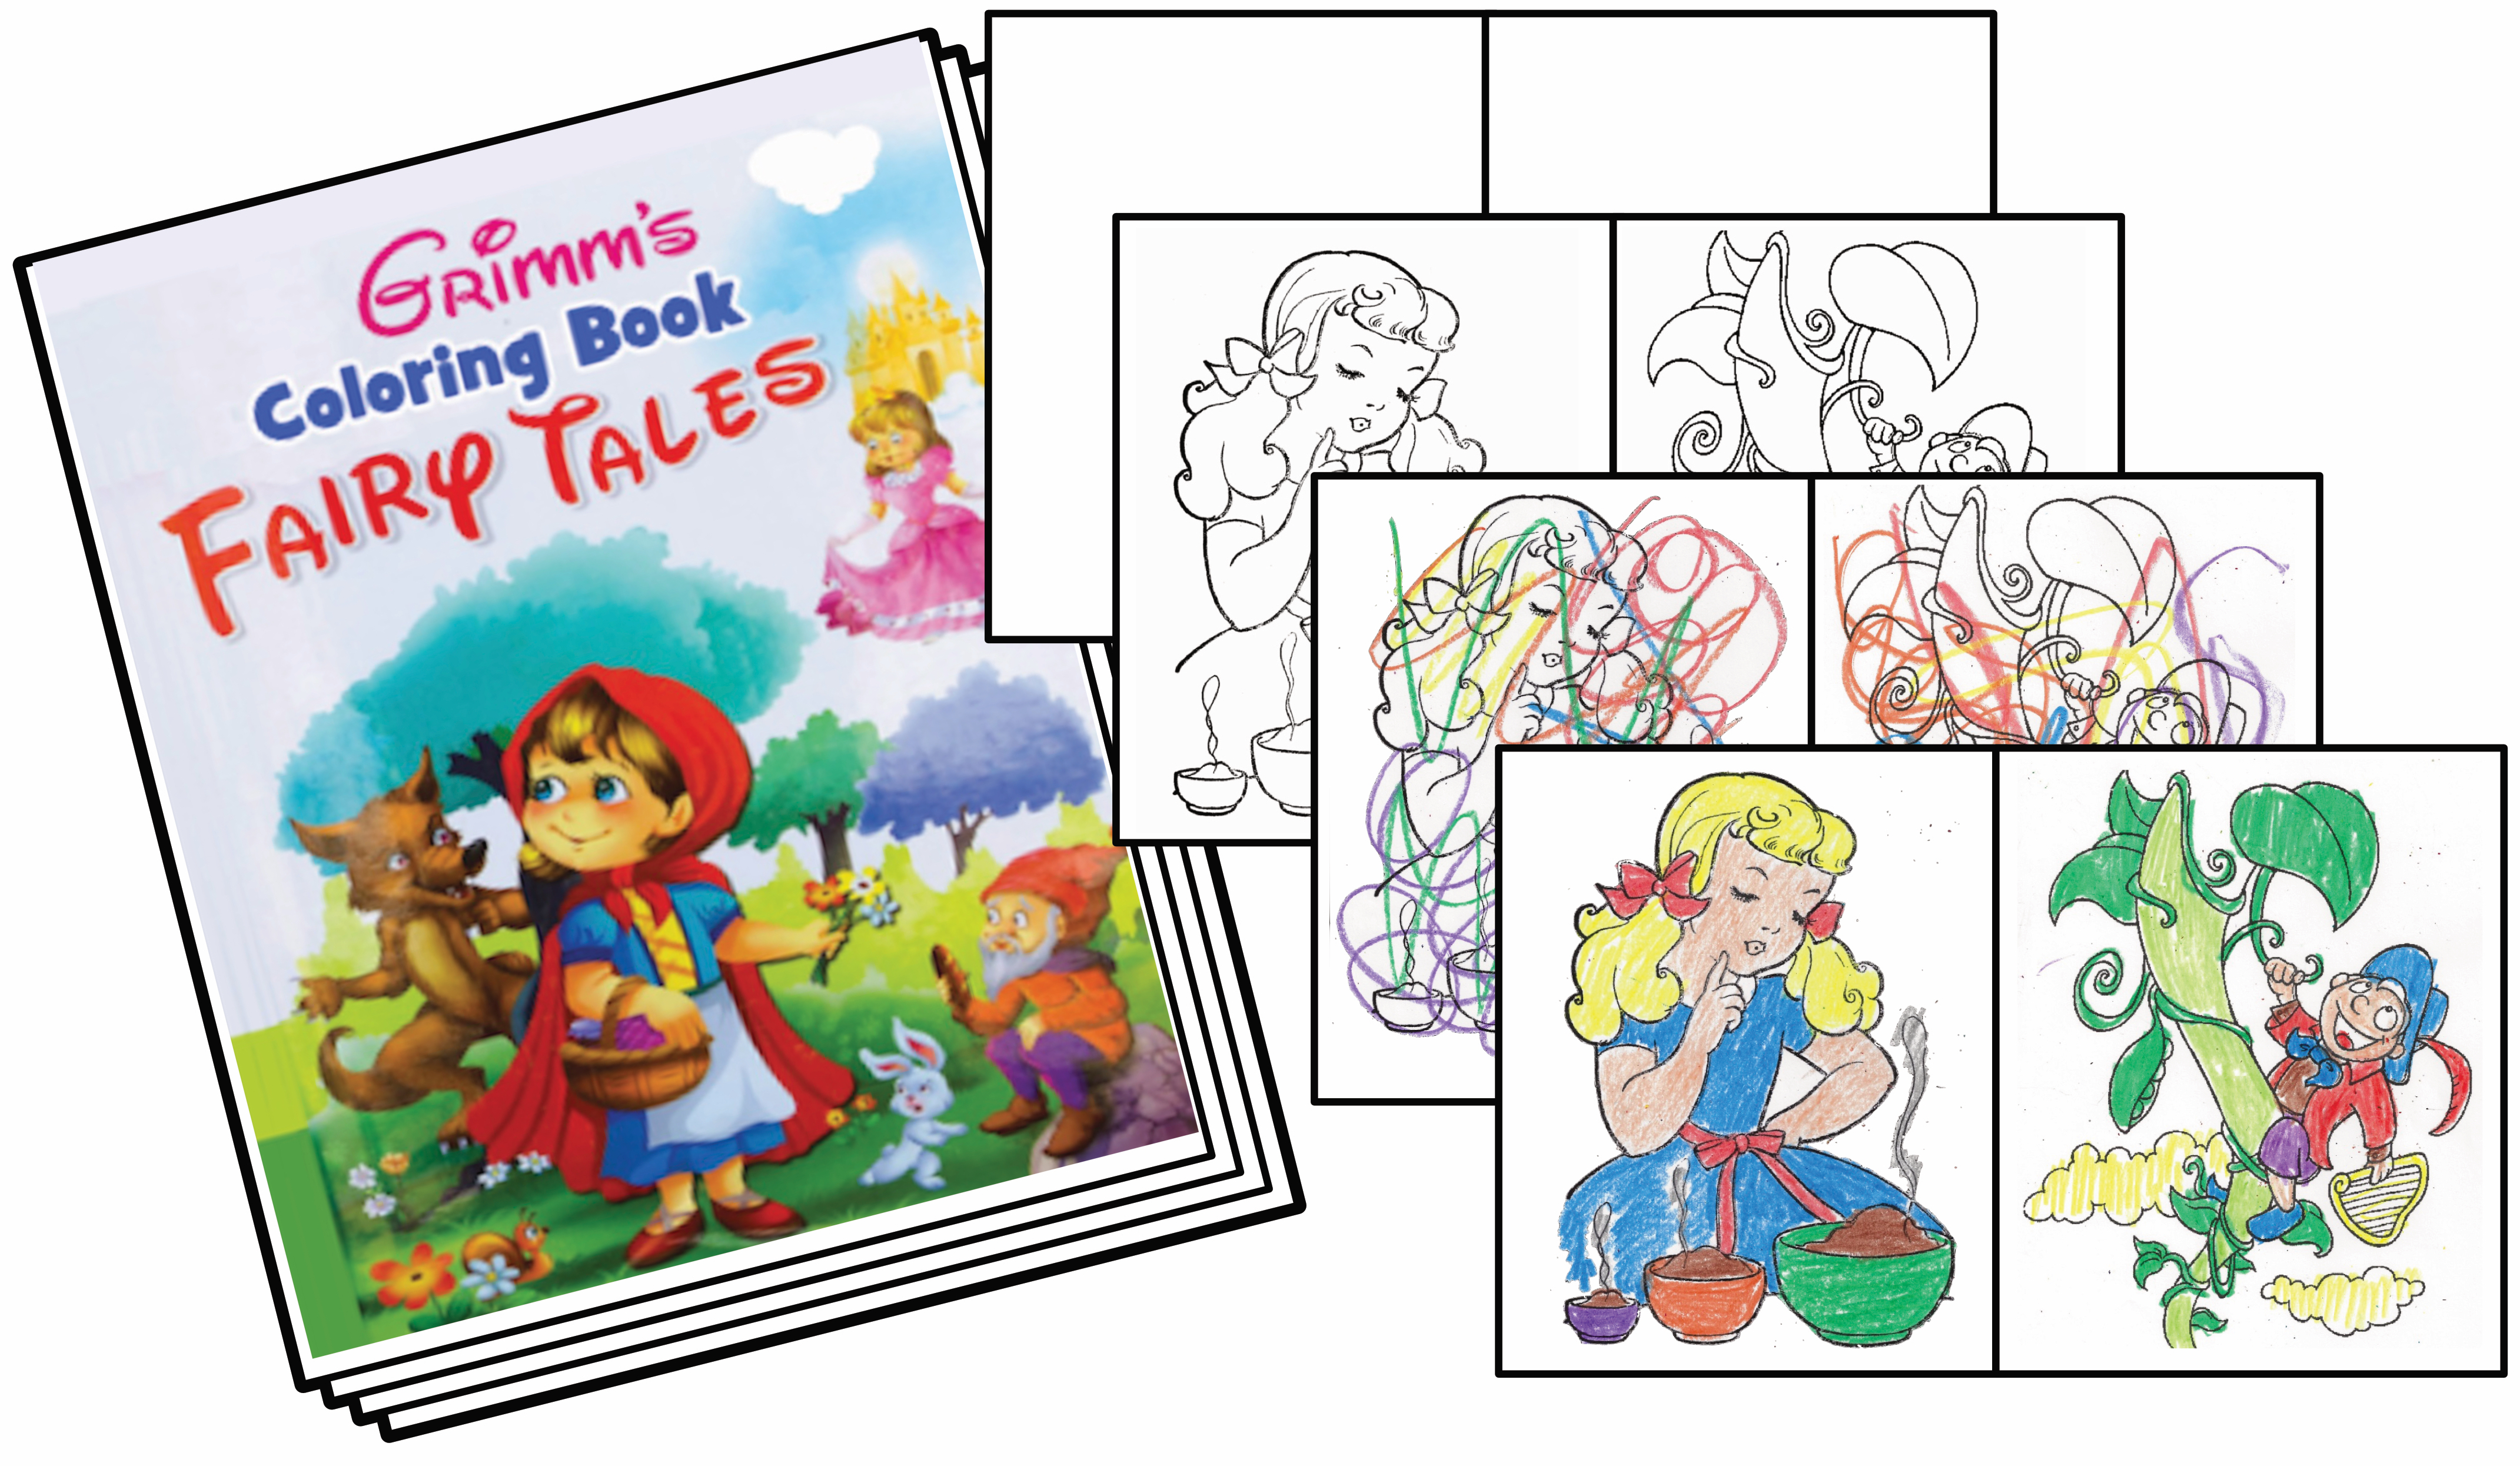 Grimm's Fairy Tale 4-Way Coloring Book